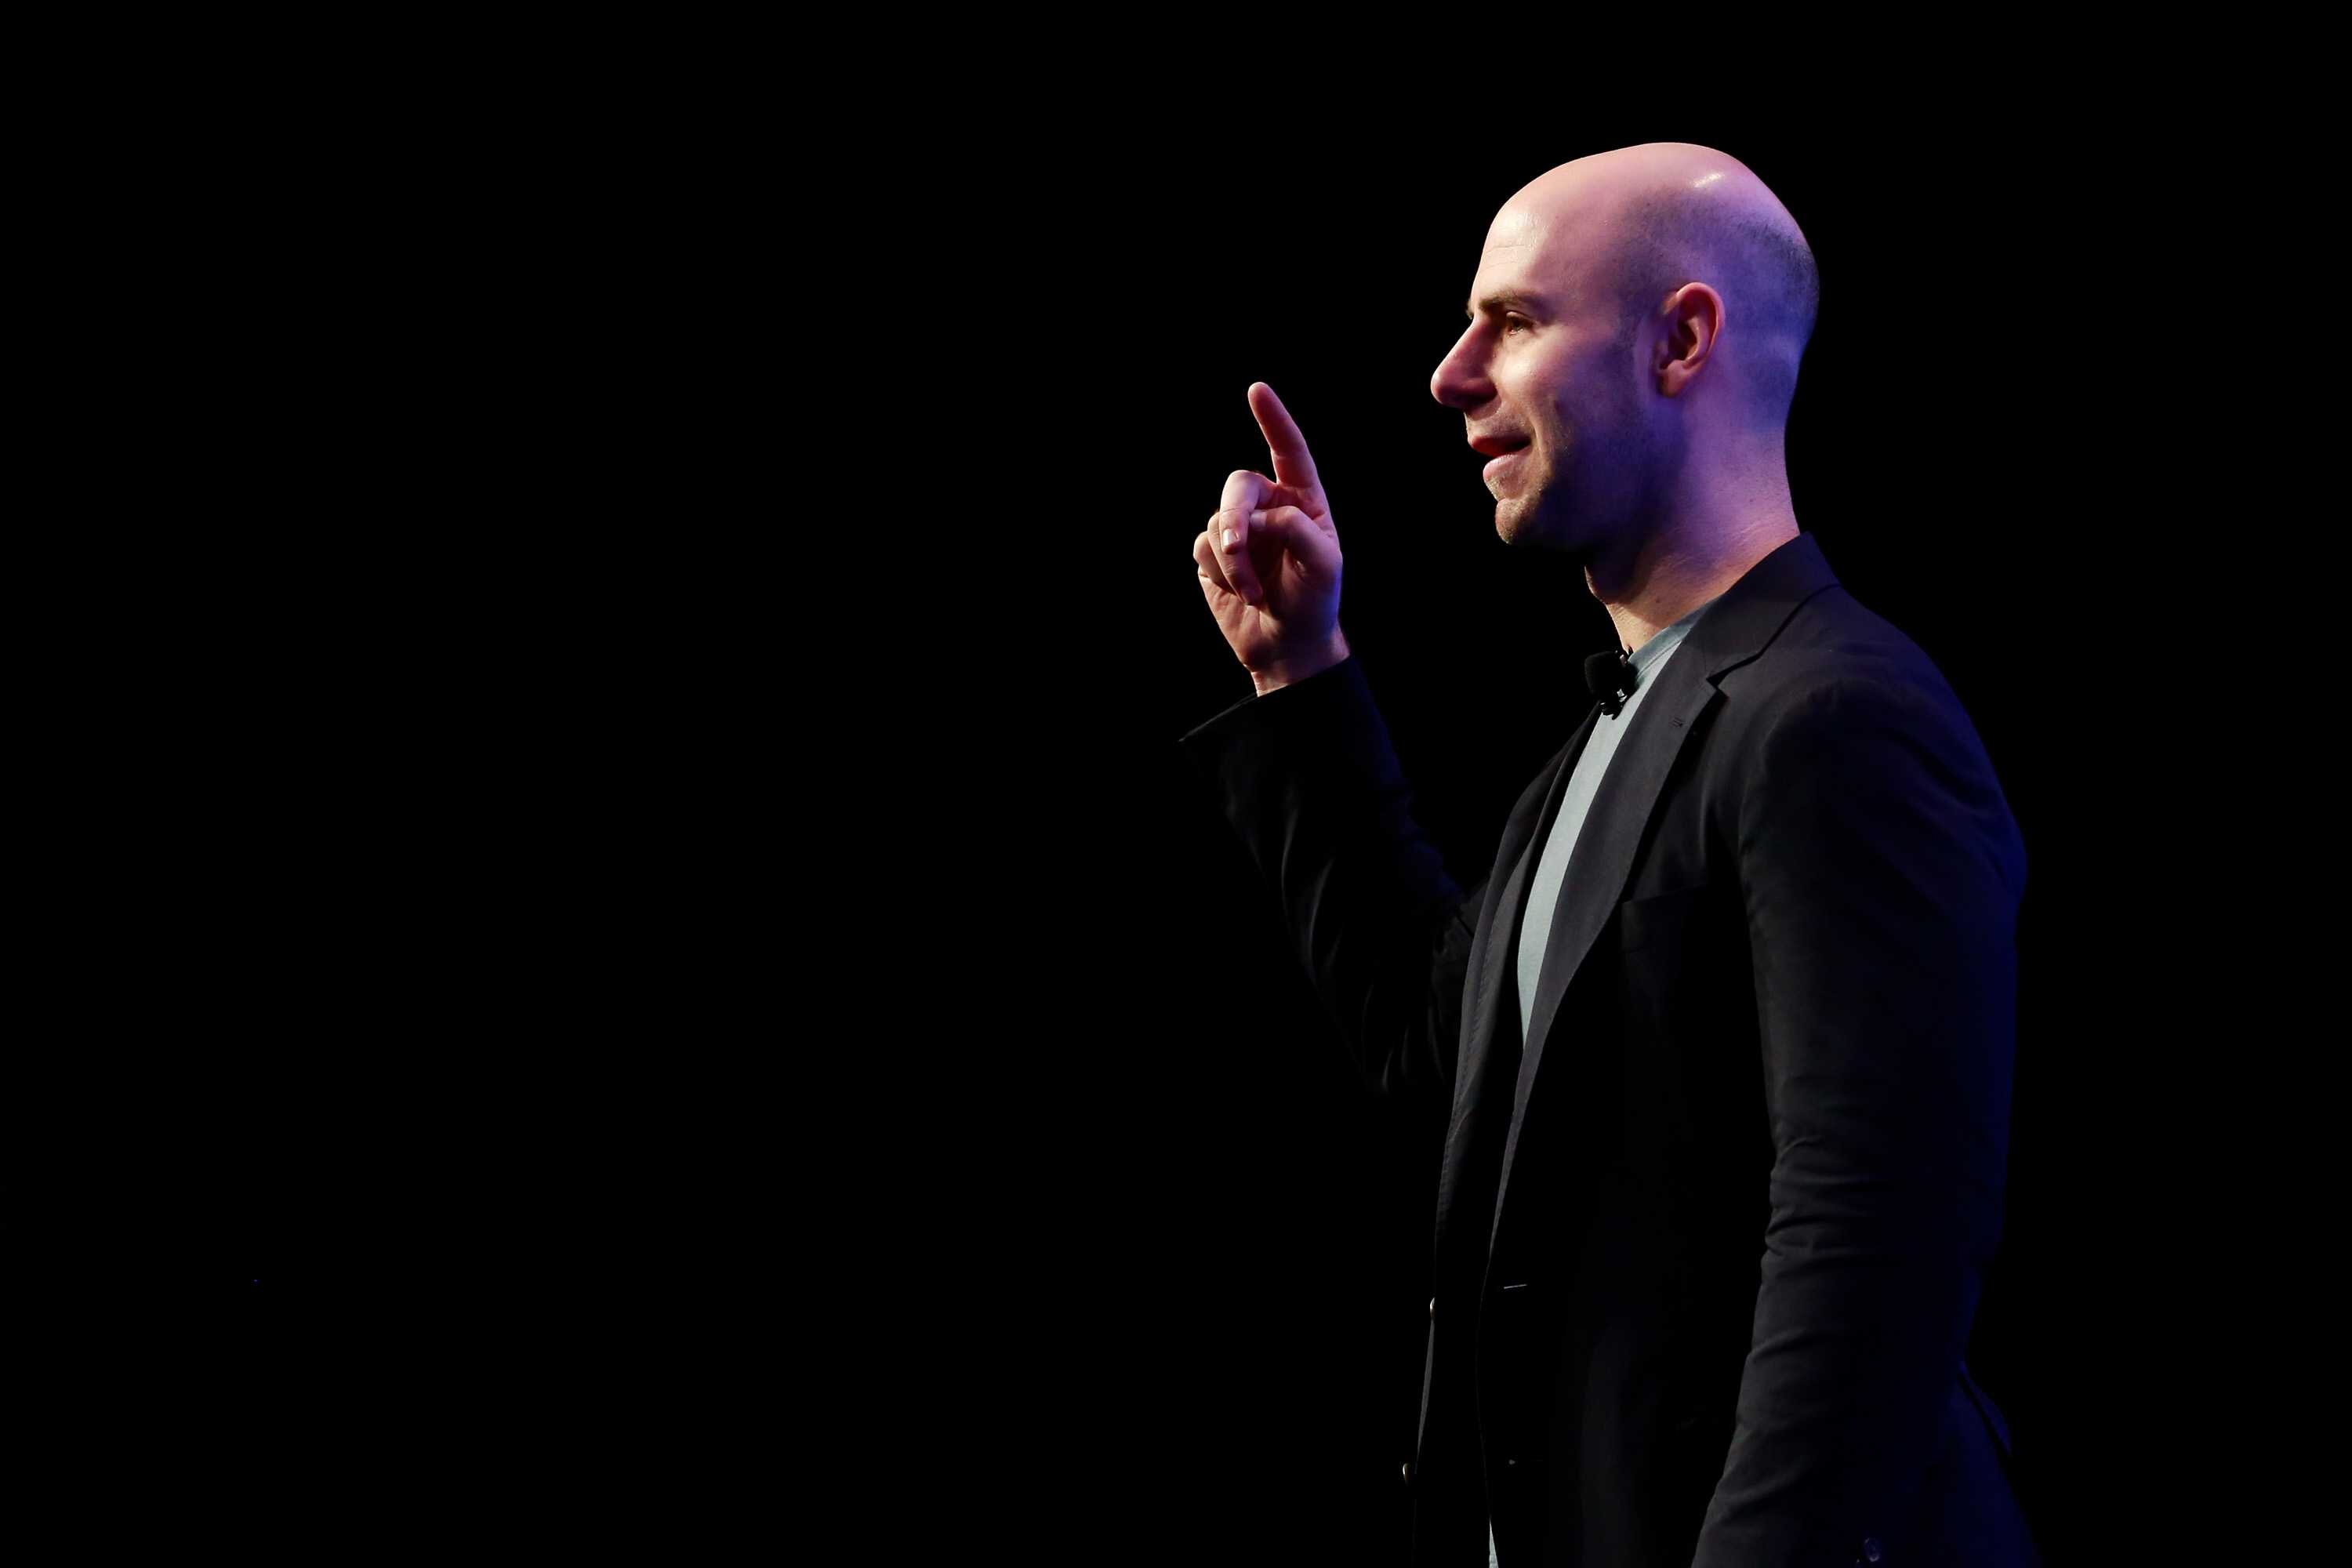 Adam Grant on the power of knowing what you don't know